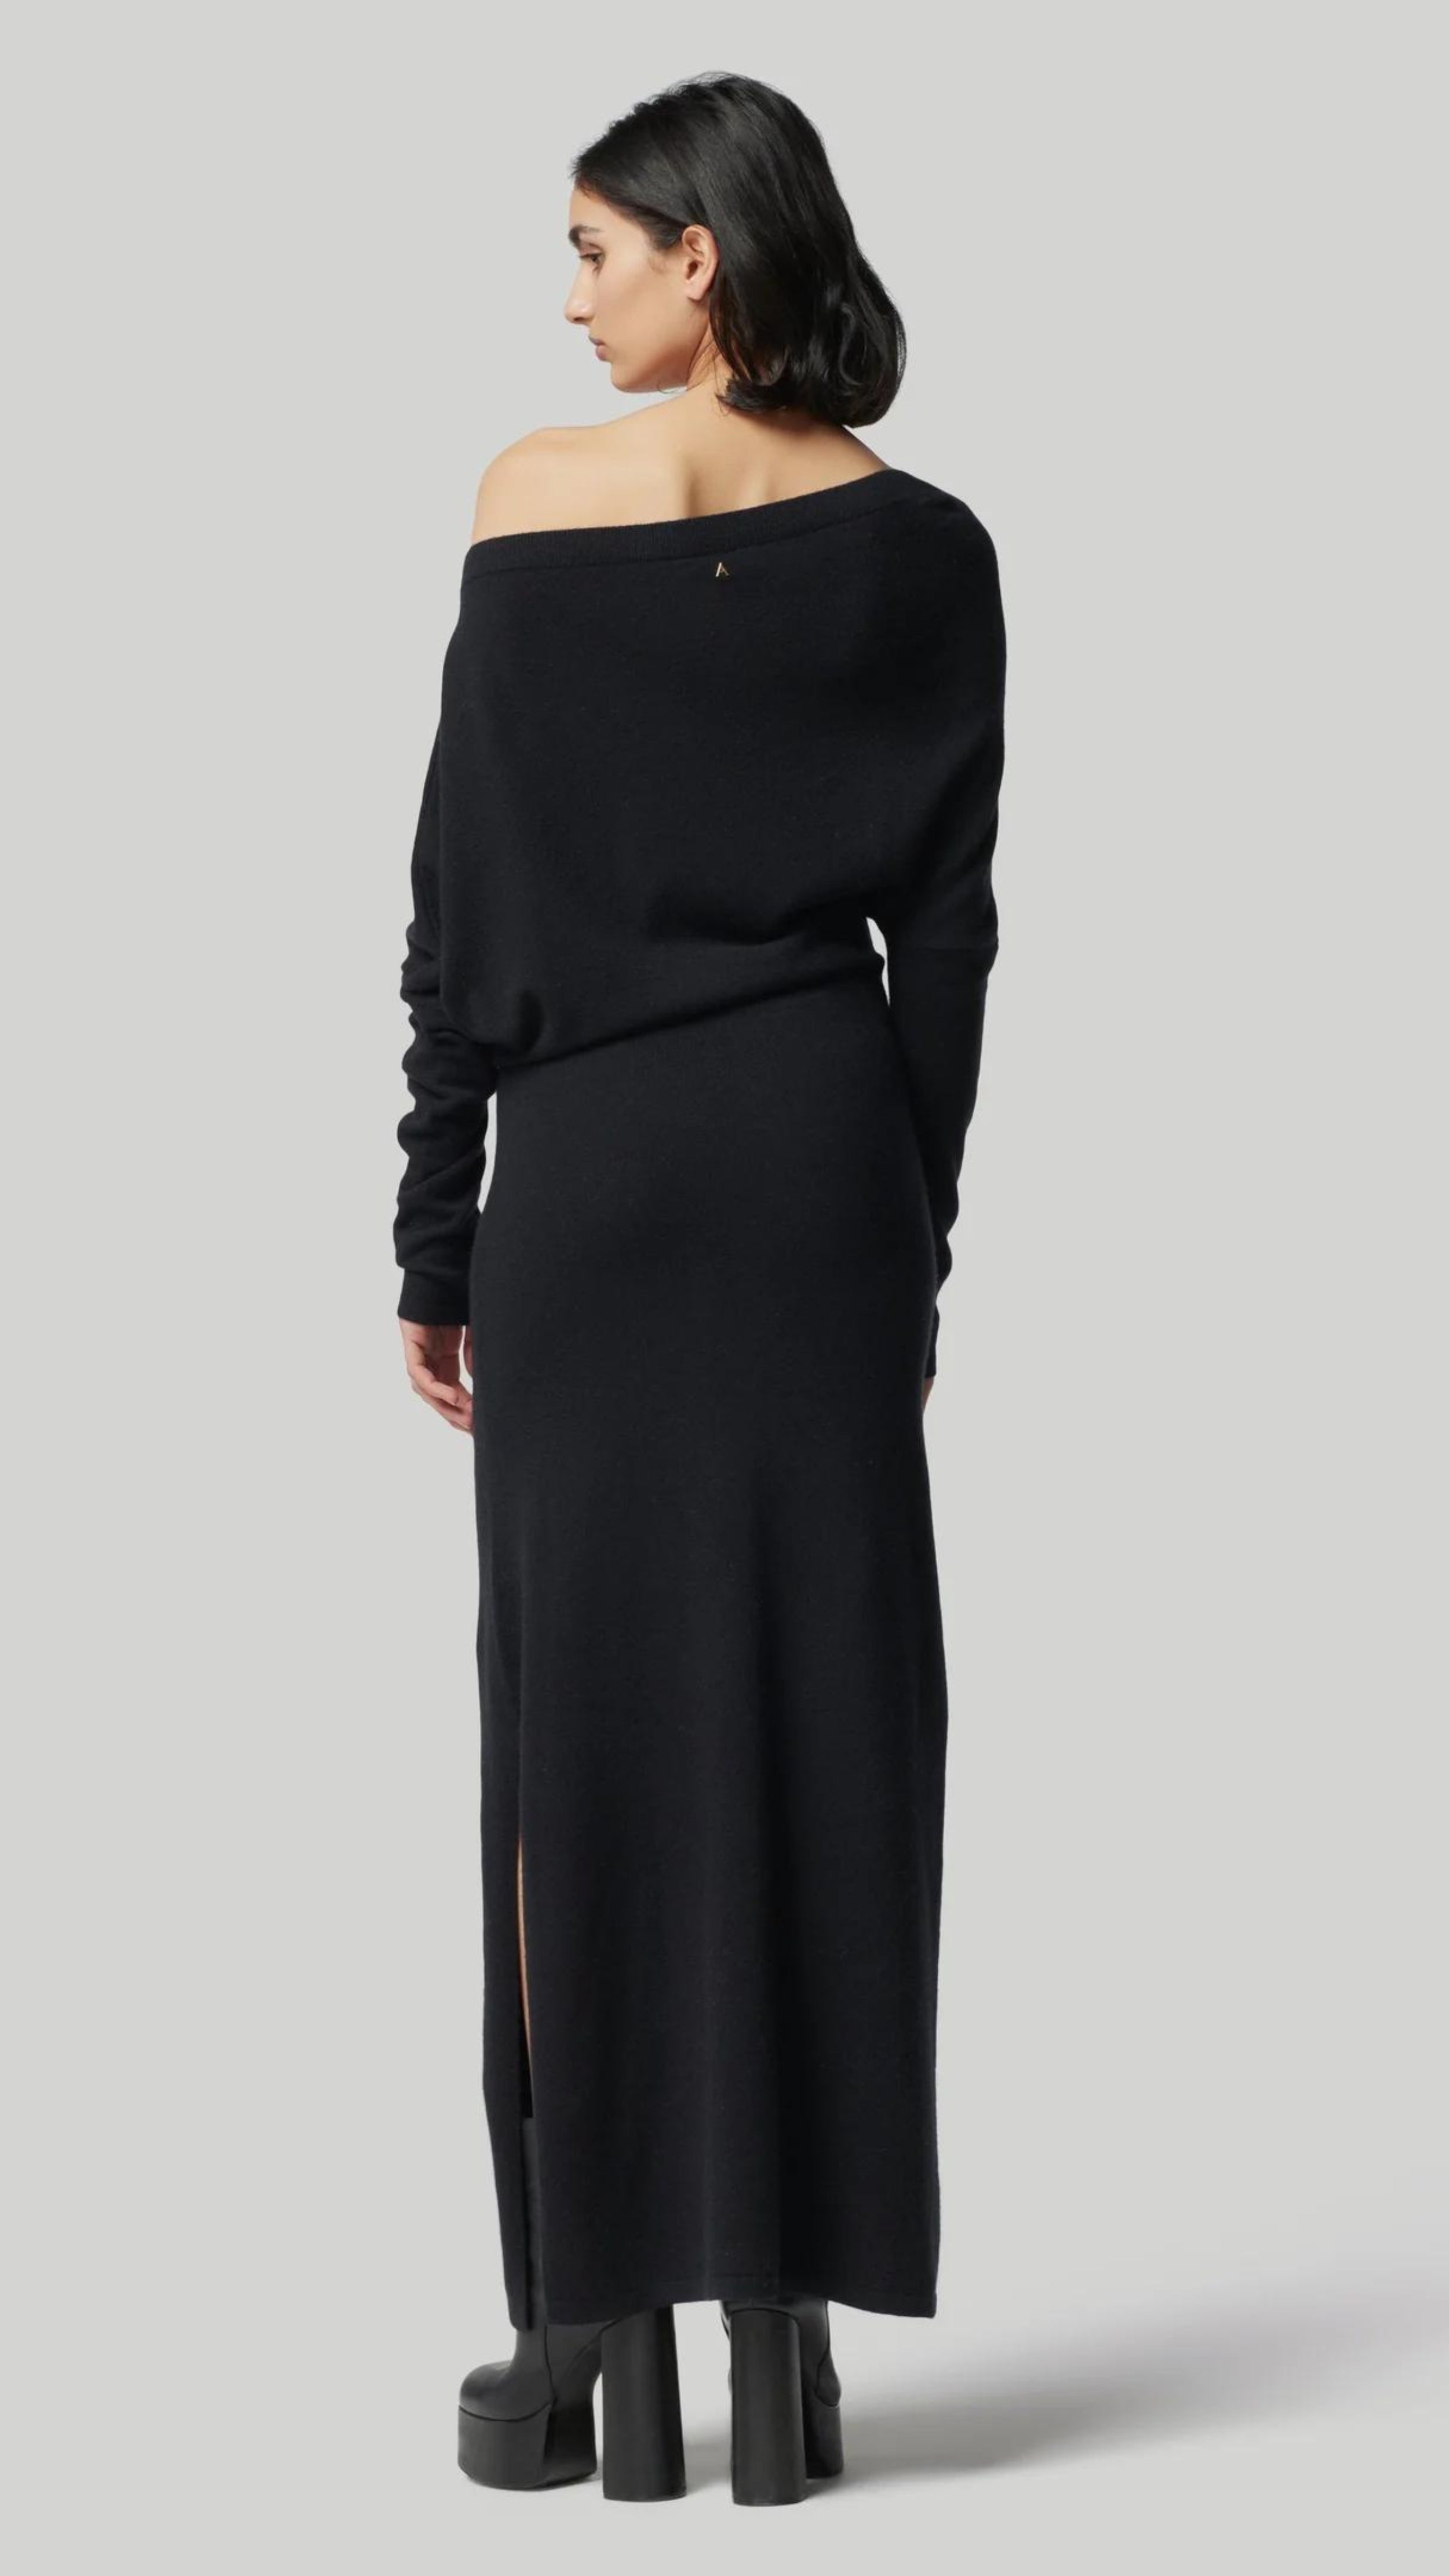 Altuzarra Black Cashmere Kasos Dress. The dress features an oversized off-the-shoulder top, slim long sleeves, an ankle-length skirt with a side slit hem. Off duty ballerina elegance in the style. Photo shows model wearing the dress facing back.